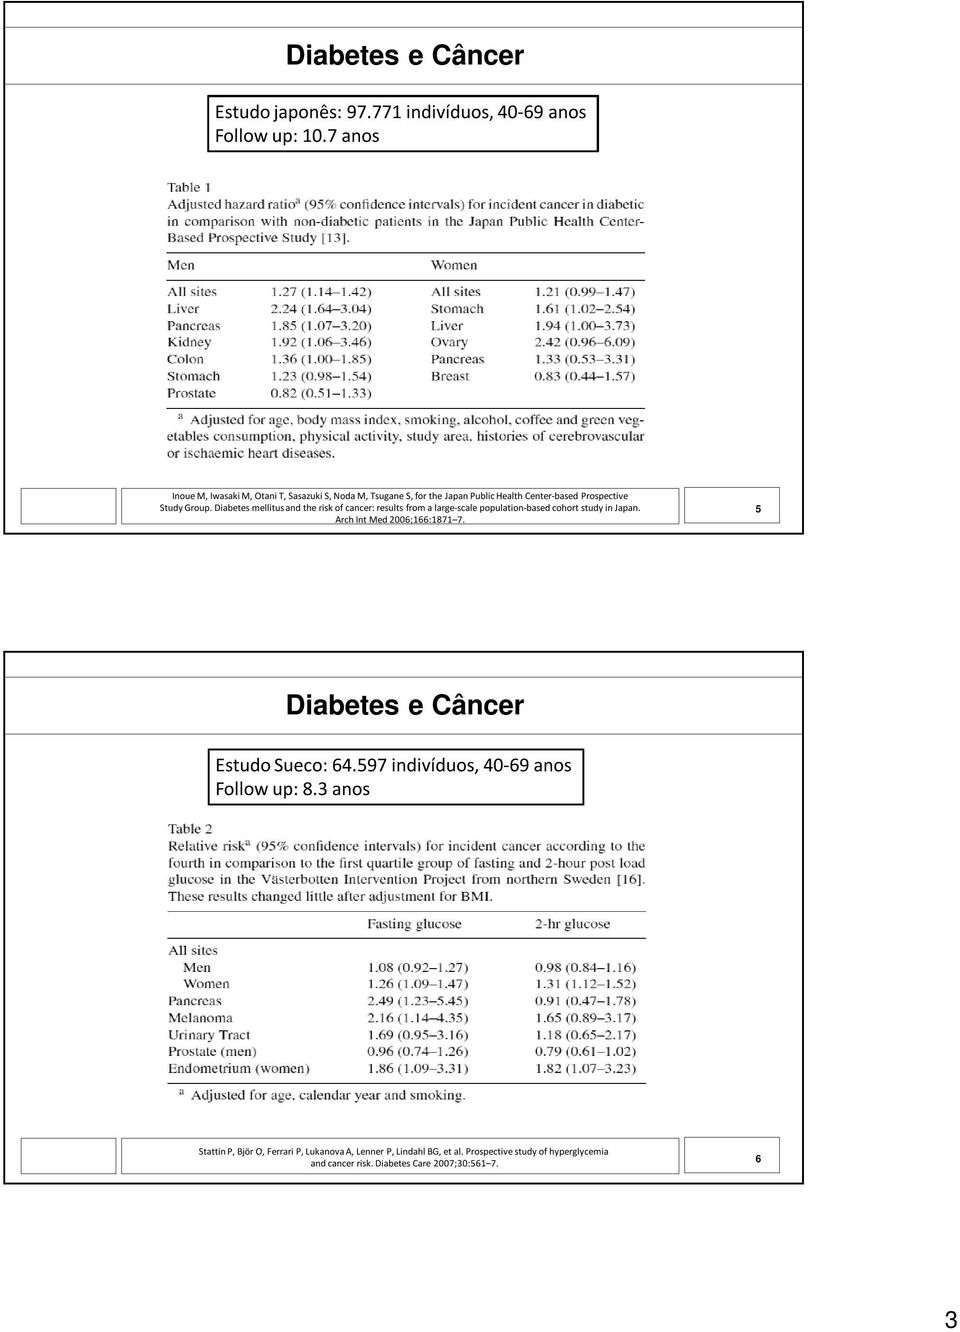 Diabetes mellitus and the risk of cancer: results from a large-scale population-based cohort study in Japan. Arch Int Med 2006;166:1871 7.